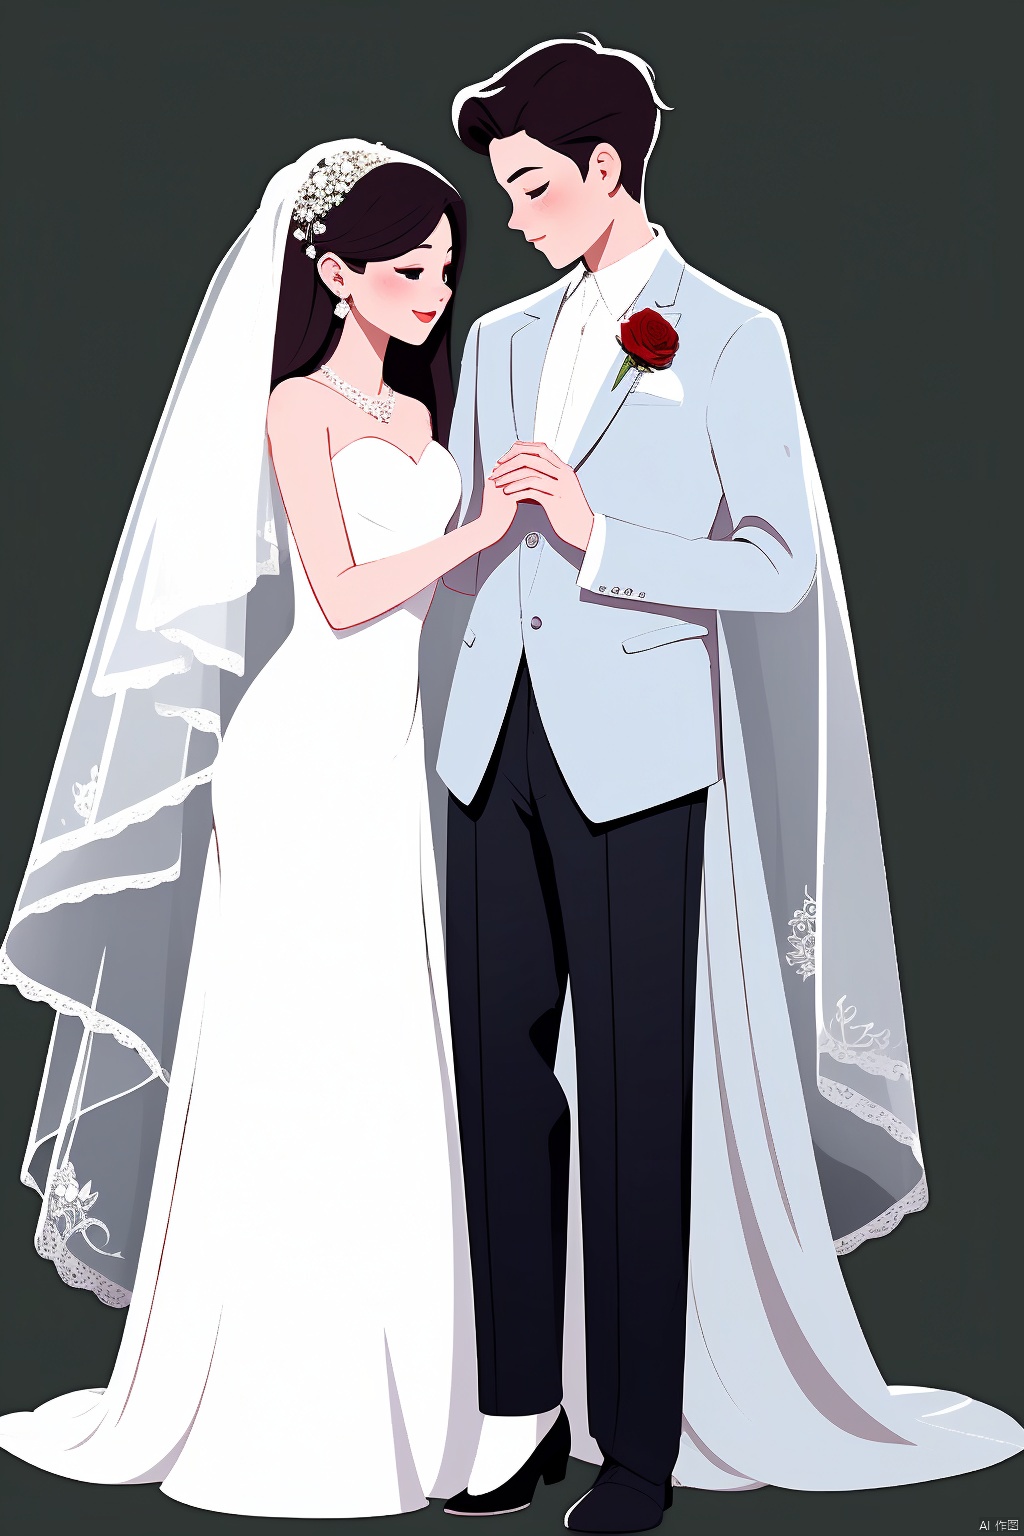  Valentine's Day,Flat painted style,1girl,1boy,rose,wedding_dress,simple background,,love,romantism,masterpiece,